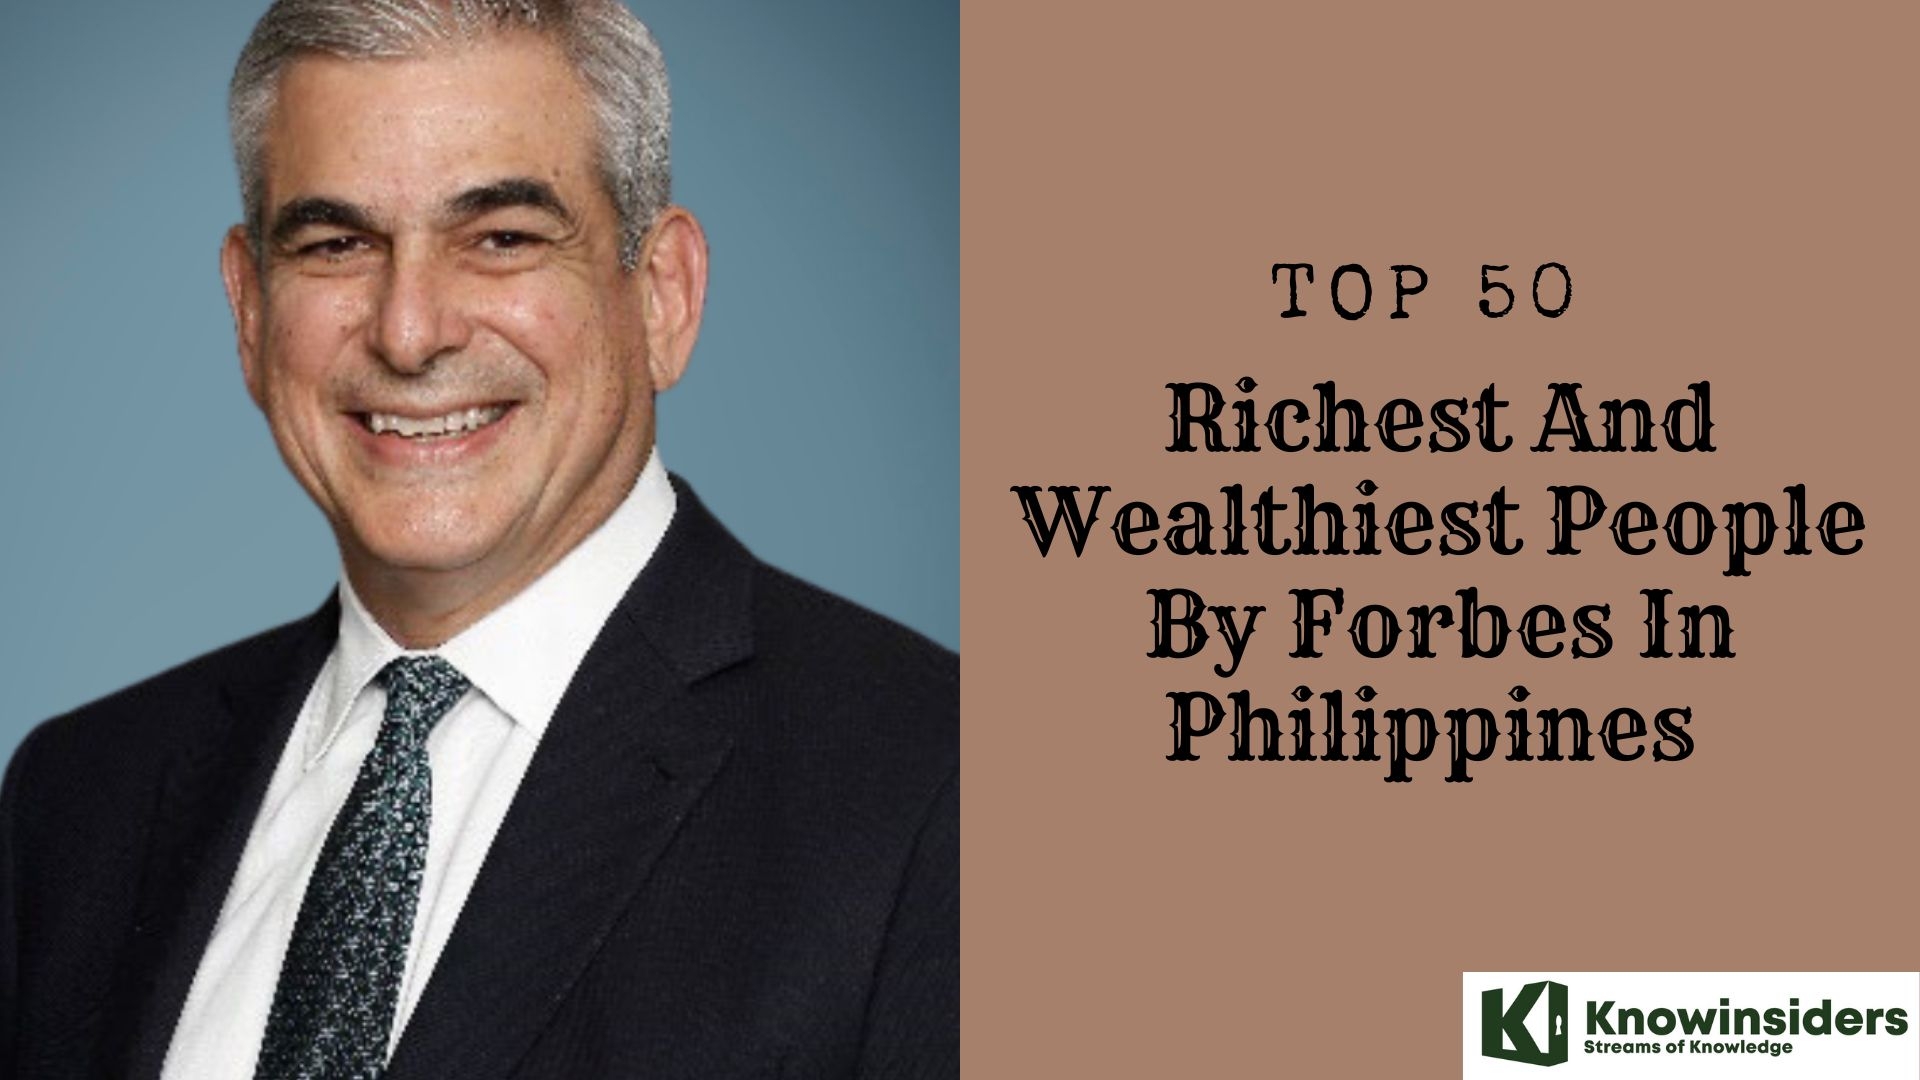 Top 50 Richest And Wealthiest People By Forbes In Philippines  Knowinsiders.com 